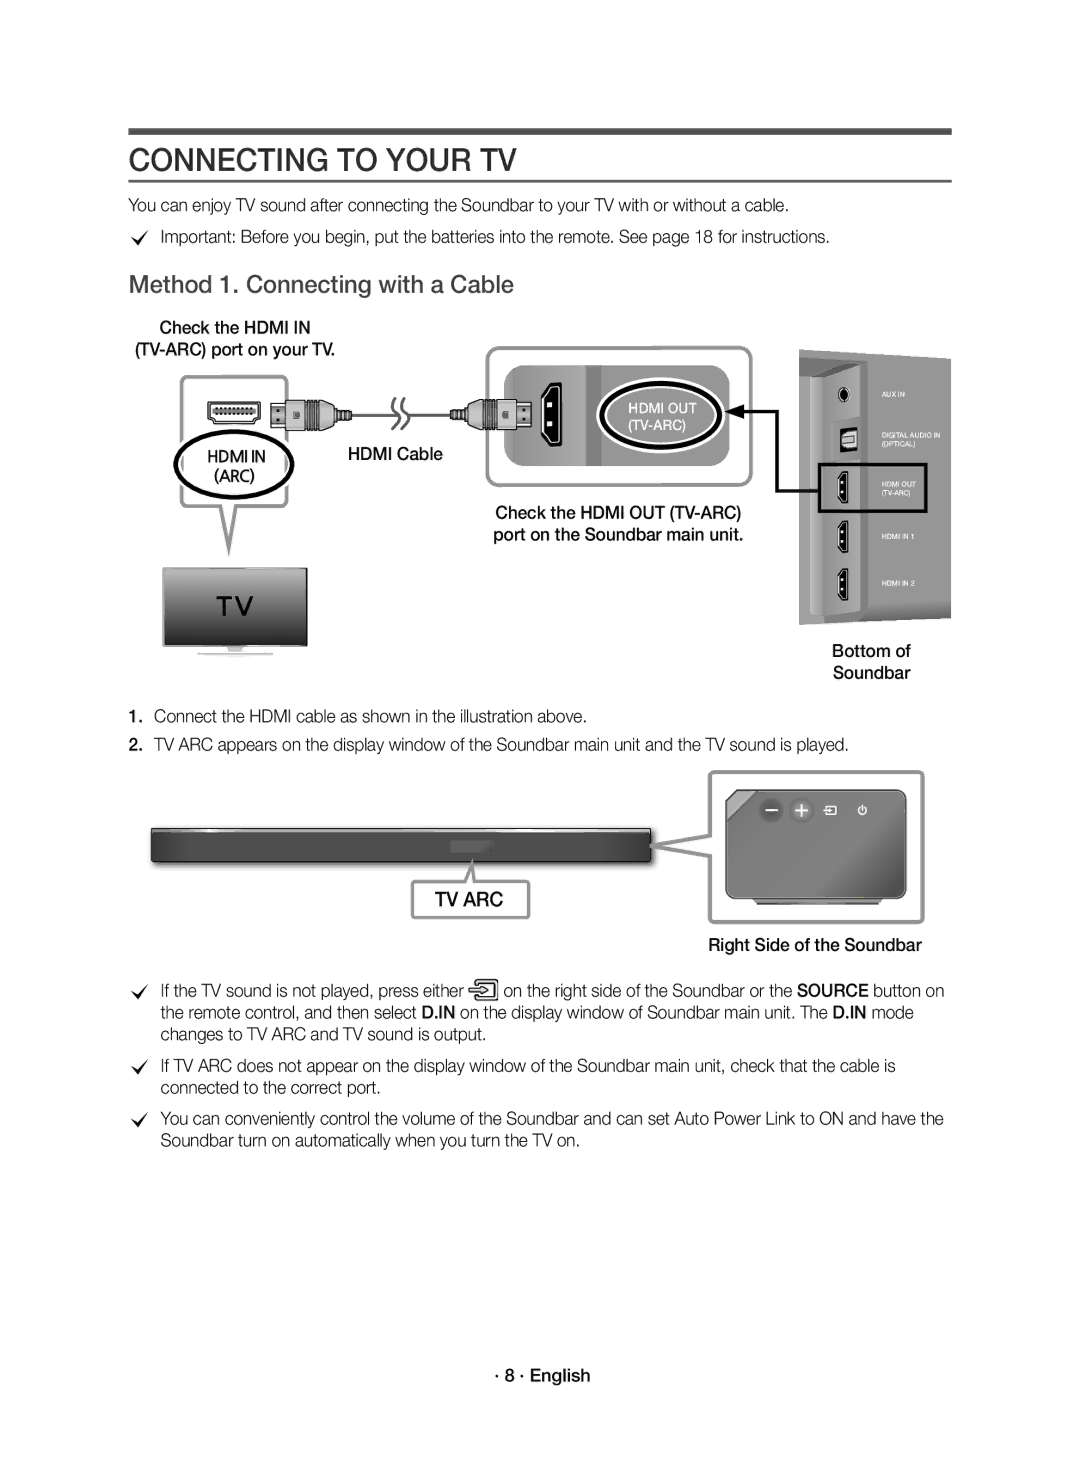 Samsung HW-K950/XV manual Connecting to Your TV, Method 1. Connecting with a Cable, Check the Hdmi TV-ARC port on your TV 